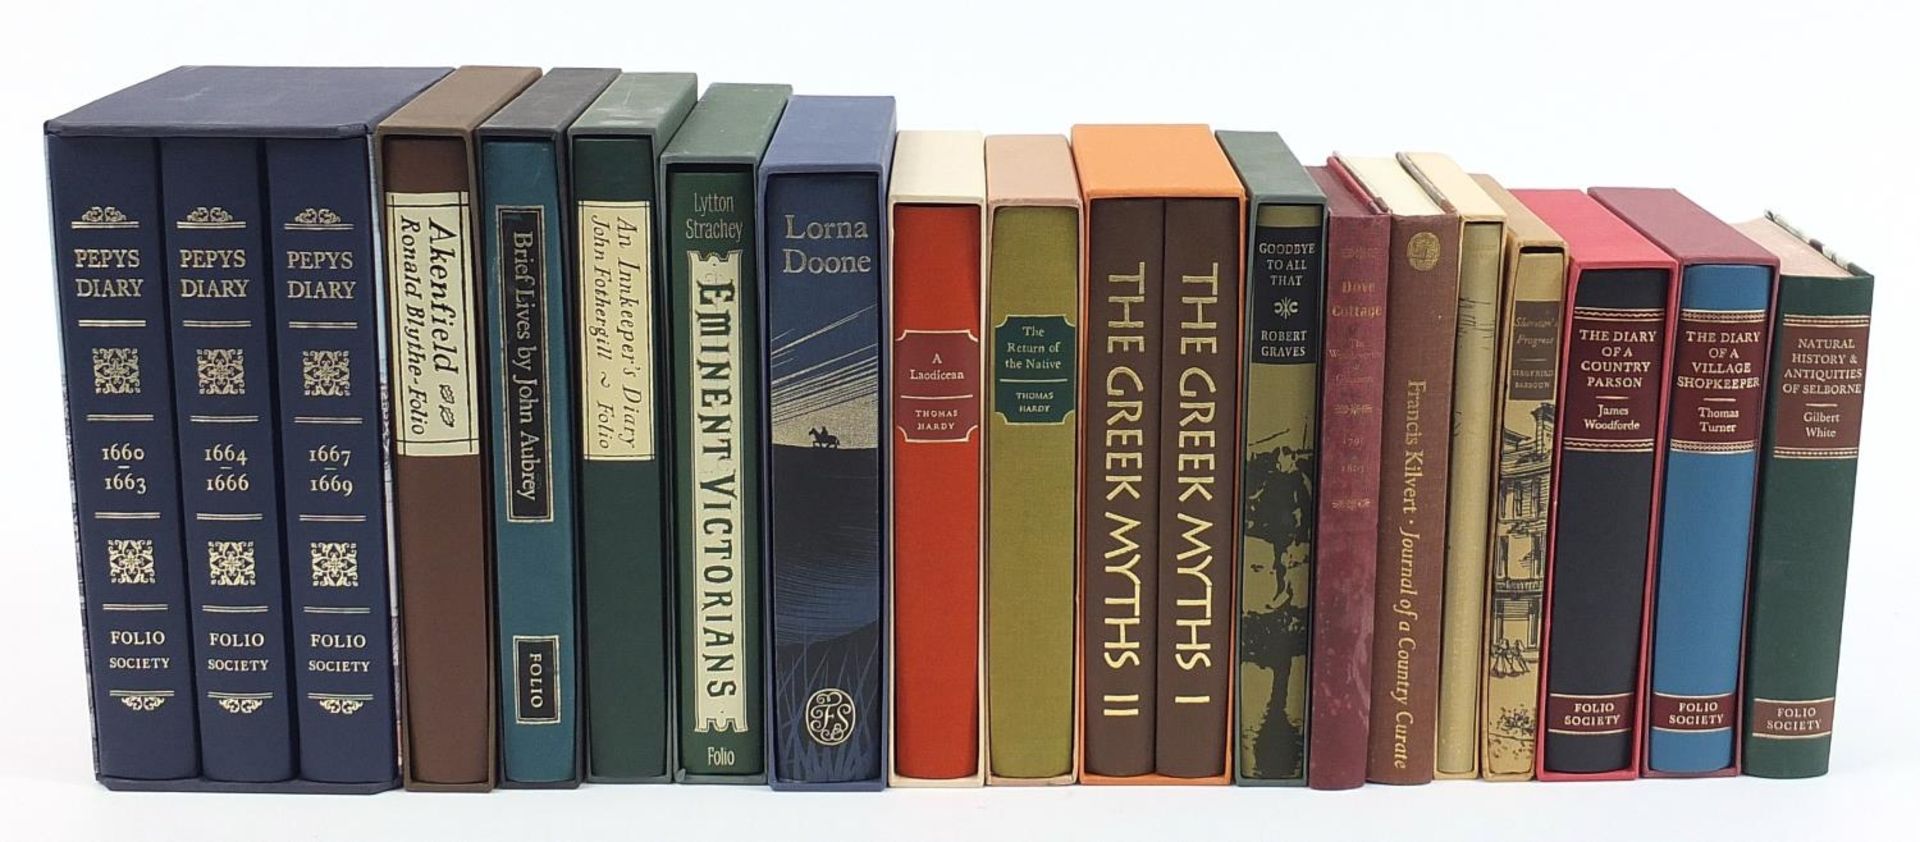 Folio Society hardback books, mostly with slip cases including Pepys' Diary, The Greek Myths and